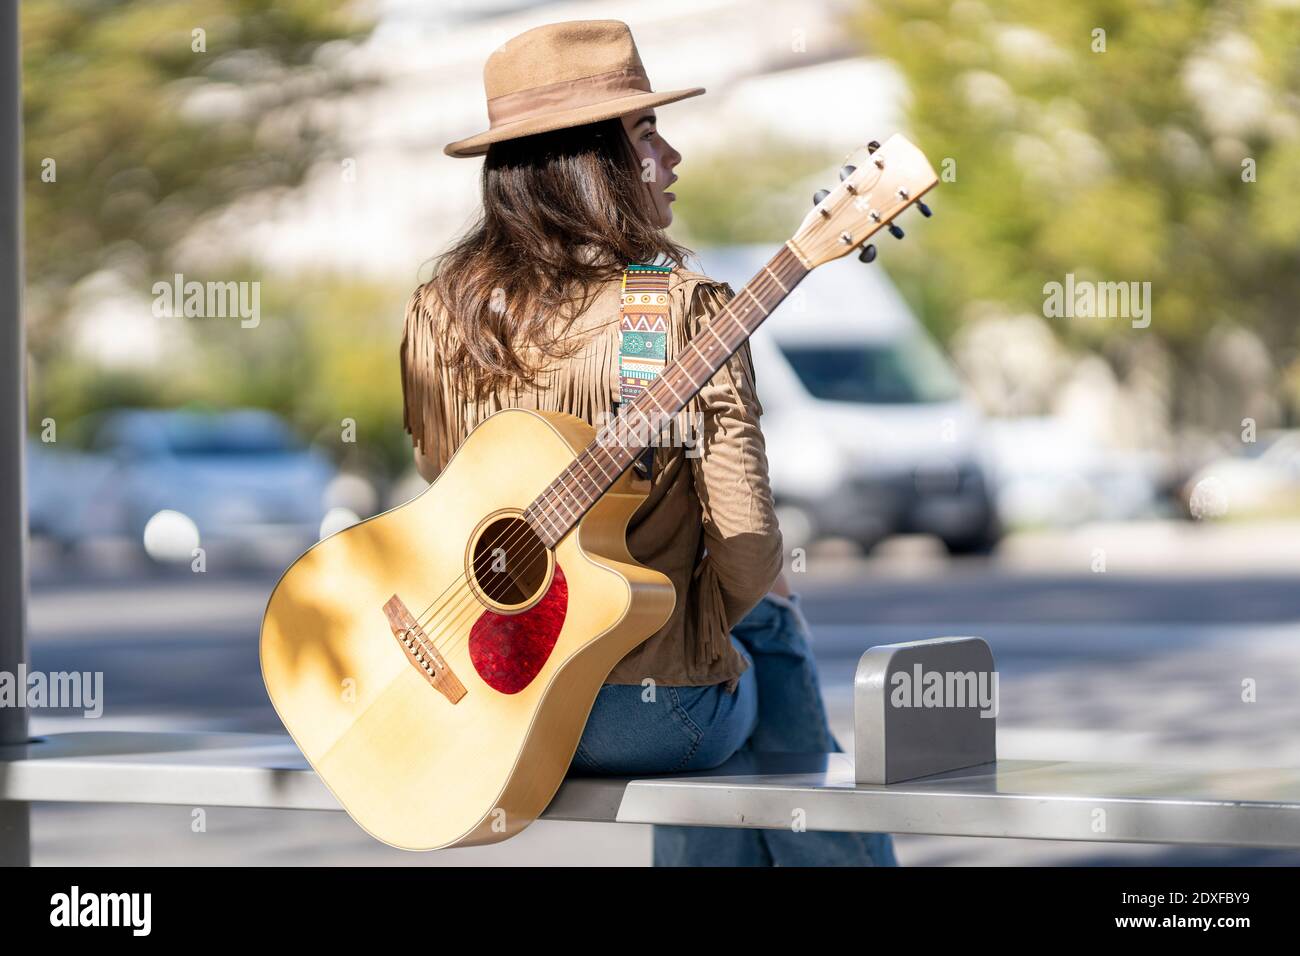 Young woman with guitar sitting at bus stop Stock Photo